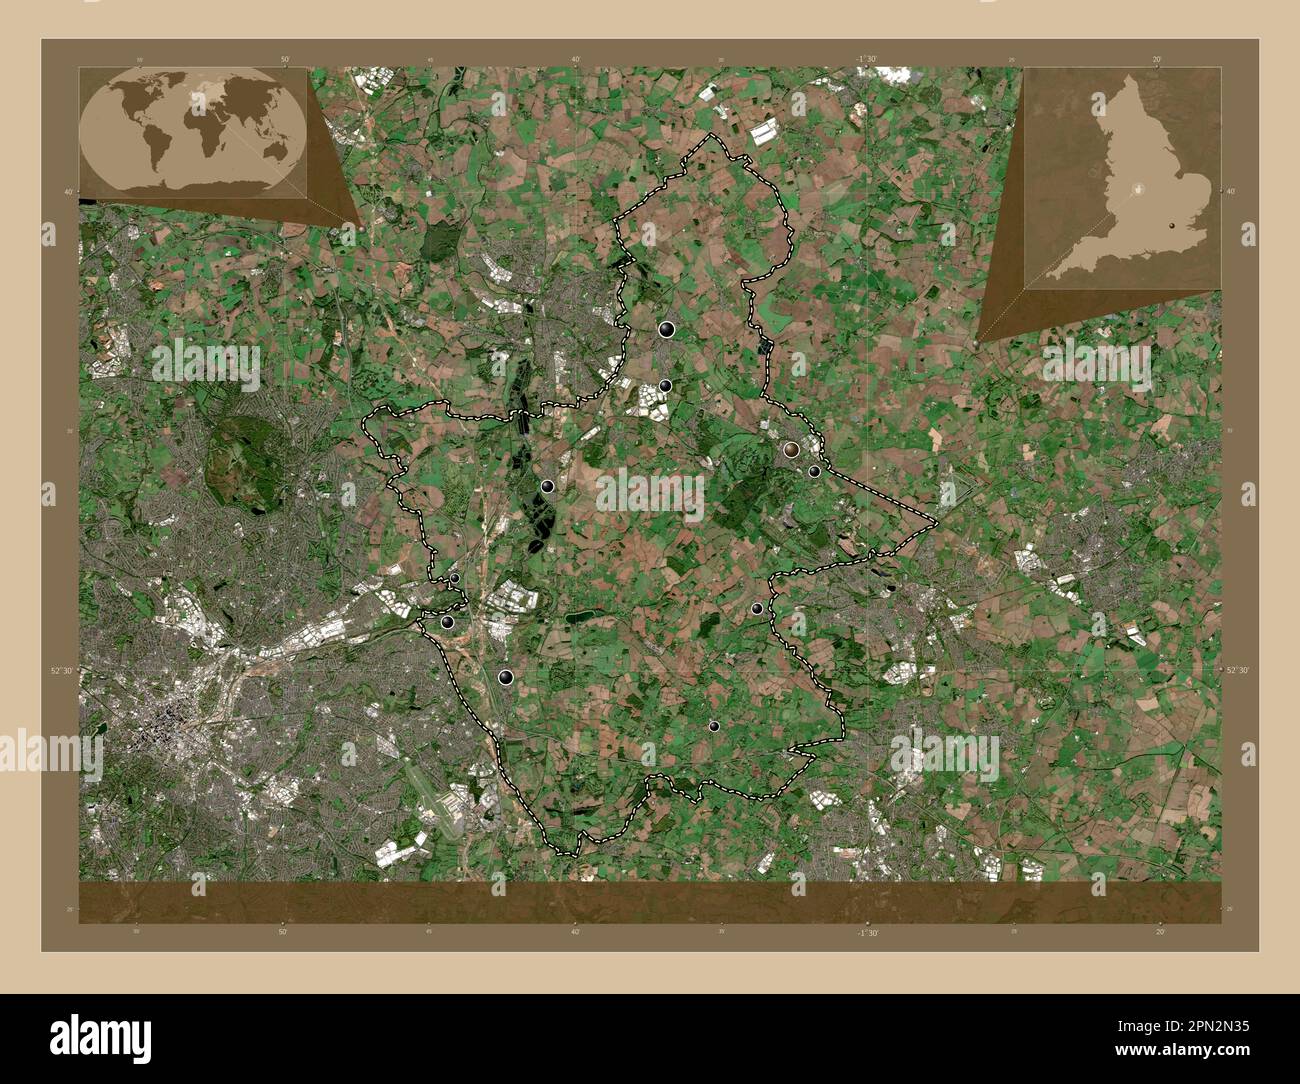 North Warwickshire, non metropolitan district of England - Great Britain. Low resolution satellite map. Locations of major cities of the region. Corne Stock Photo